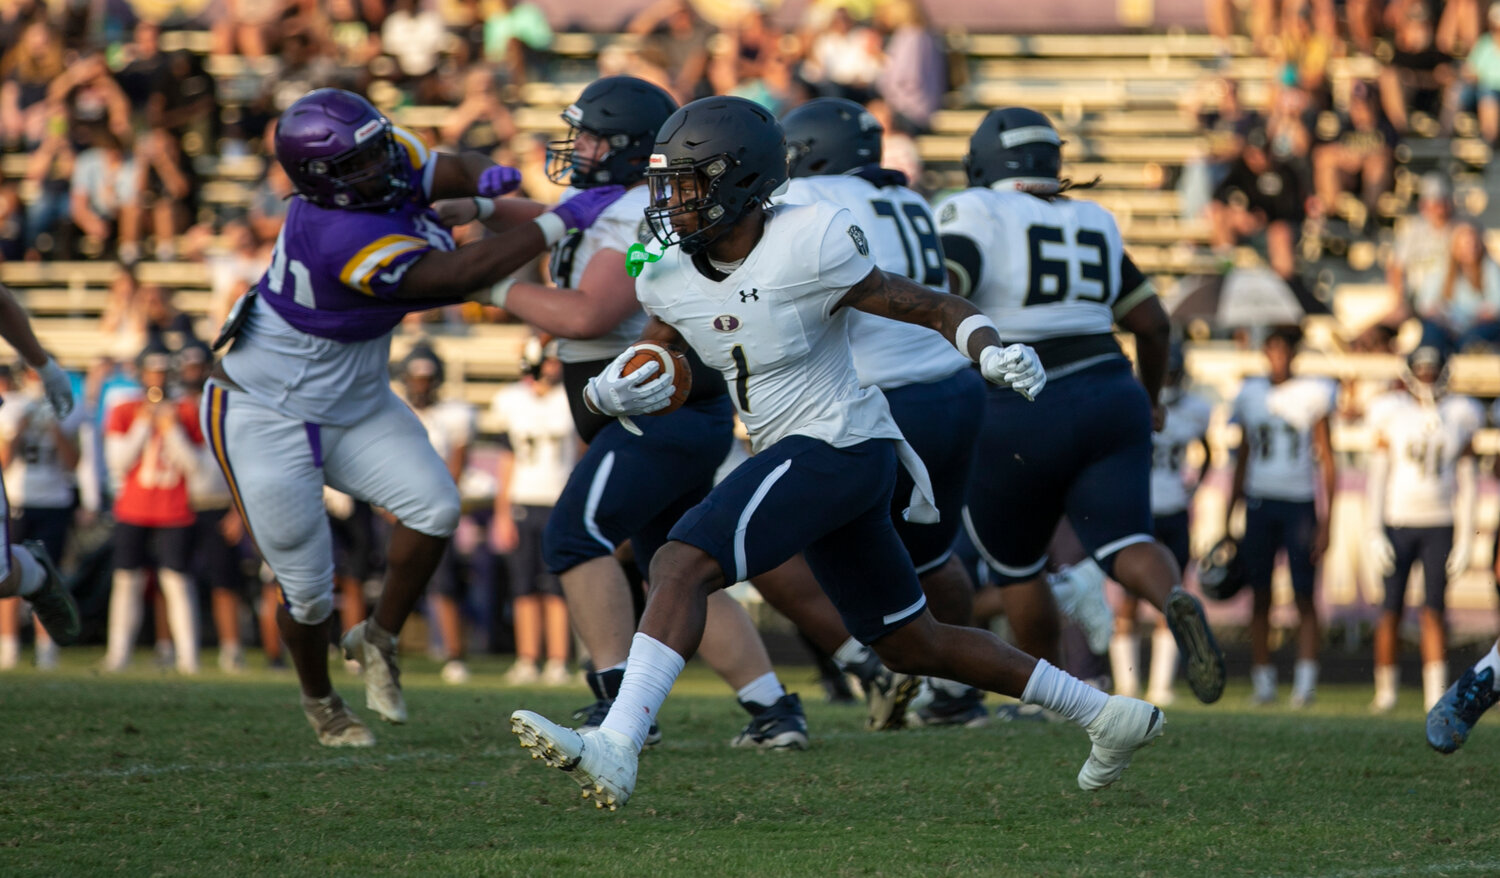 Foley’s Perry Thompson looks for running room on a carry during the Lions’ spring game against the Daphne Trojans at Jubilee Stadium on May 19. Thompson and the Foley Lions opened the regular season with a 45-19 win over Prattville where Thompson threw for one touchdown and ran for another.